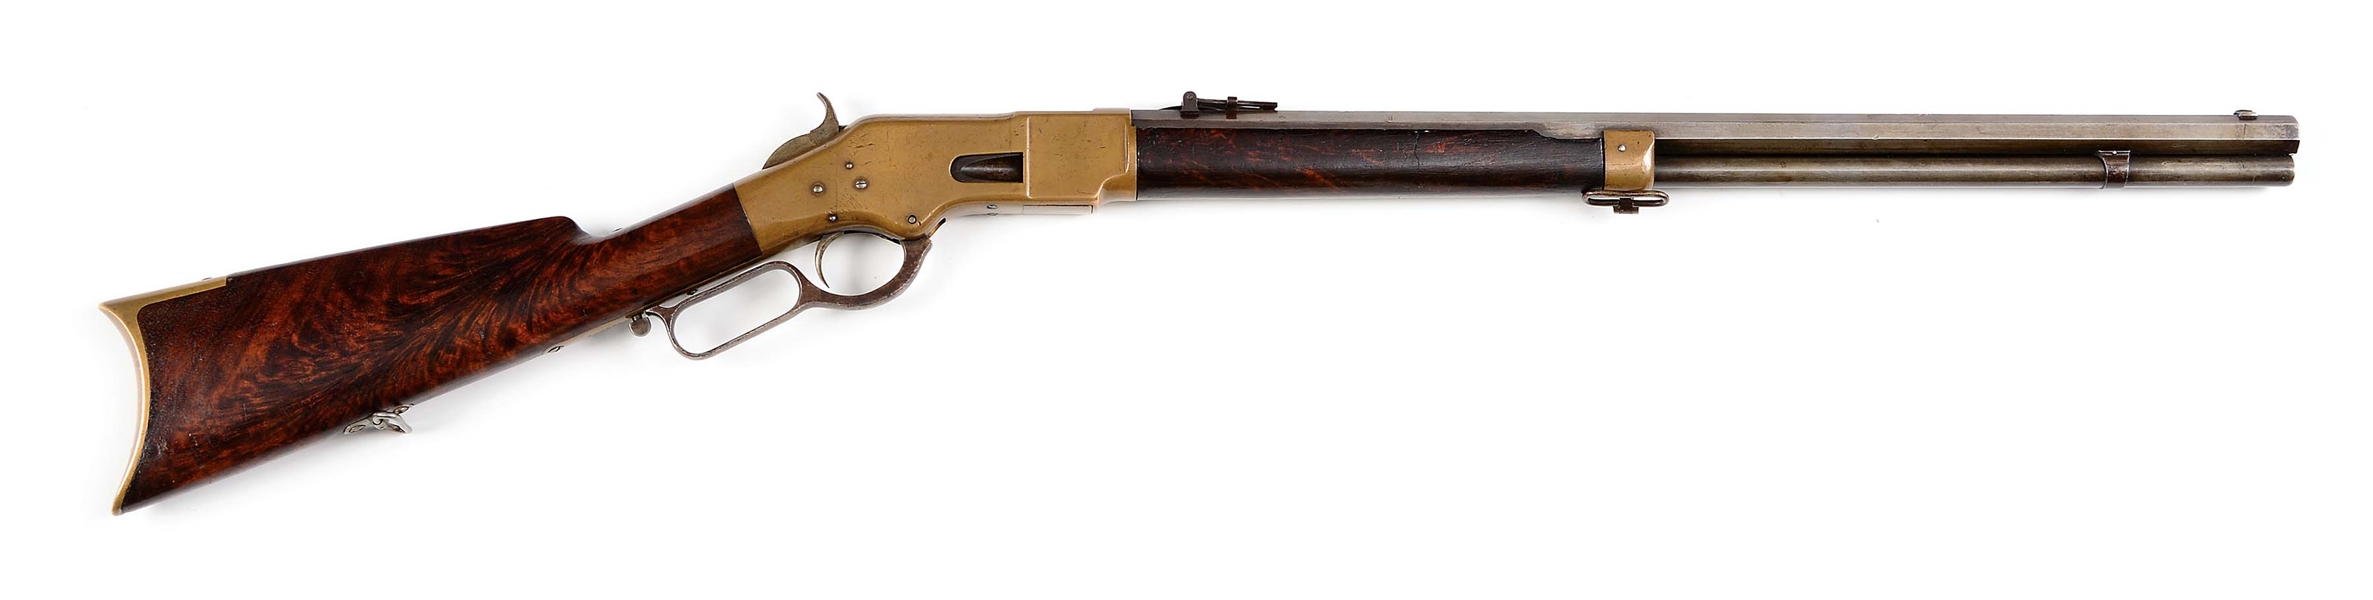 (A) WINCHESTER 3RD MODEL 1866 LEVER ACTION RIFLE WITH DELUXE STOCKS (1874).